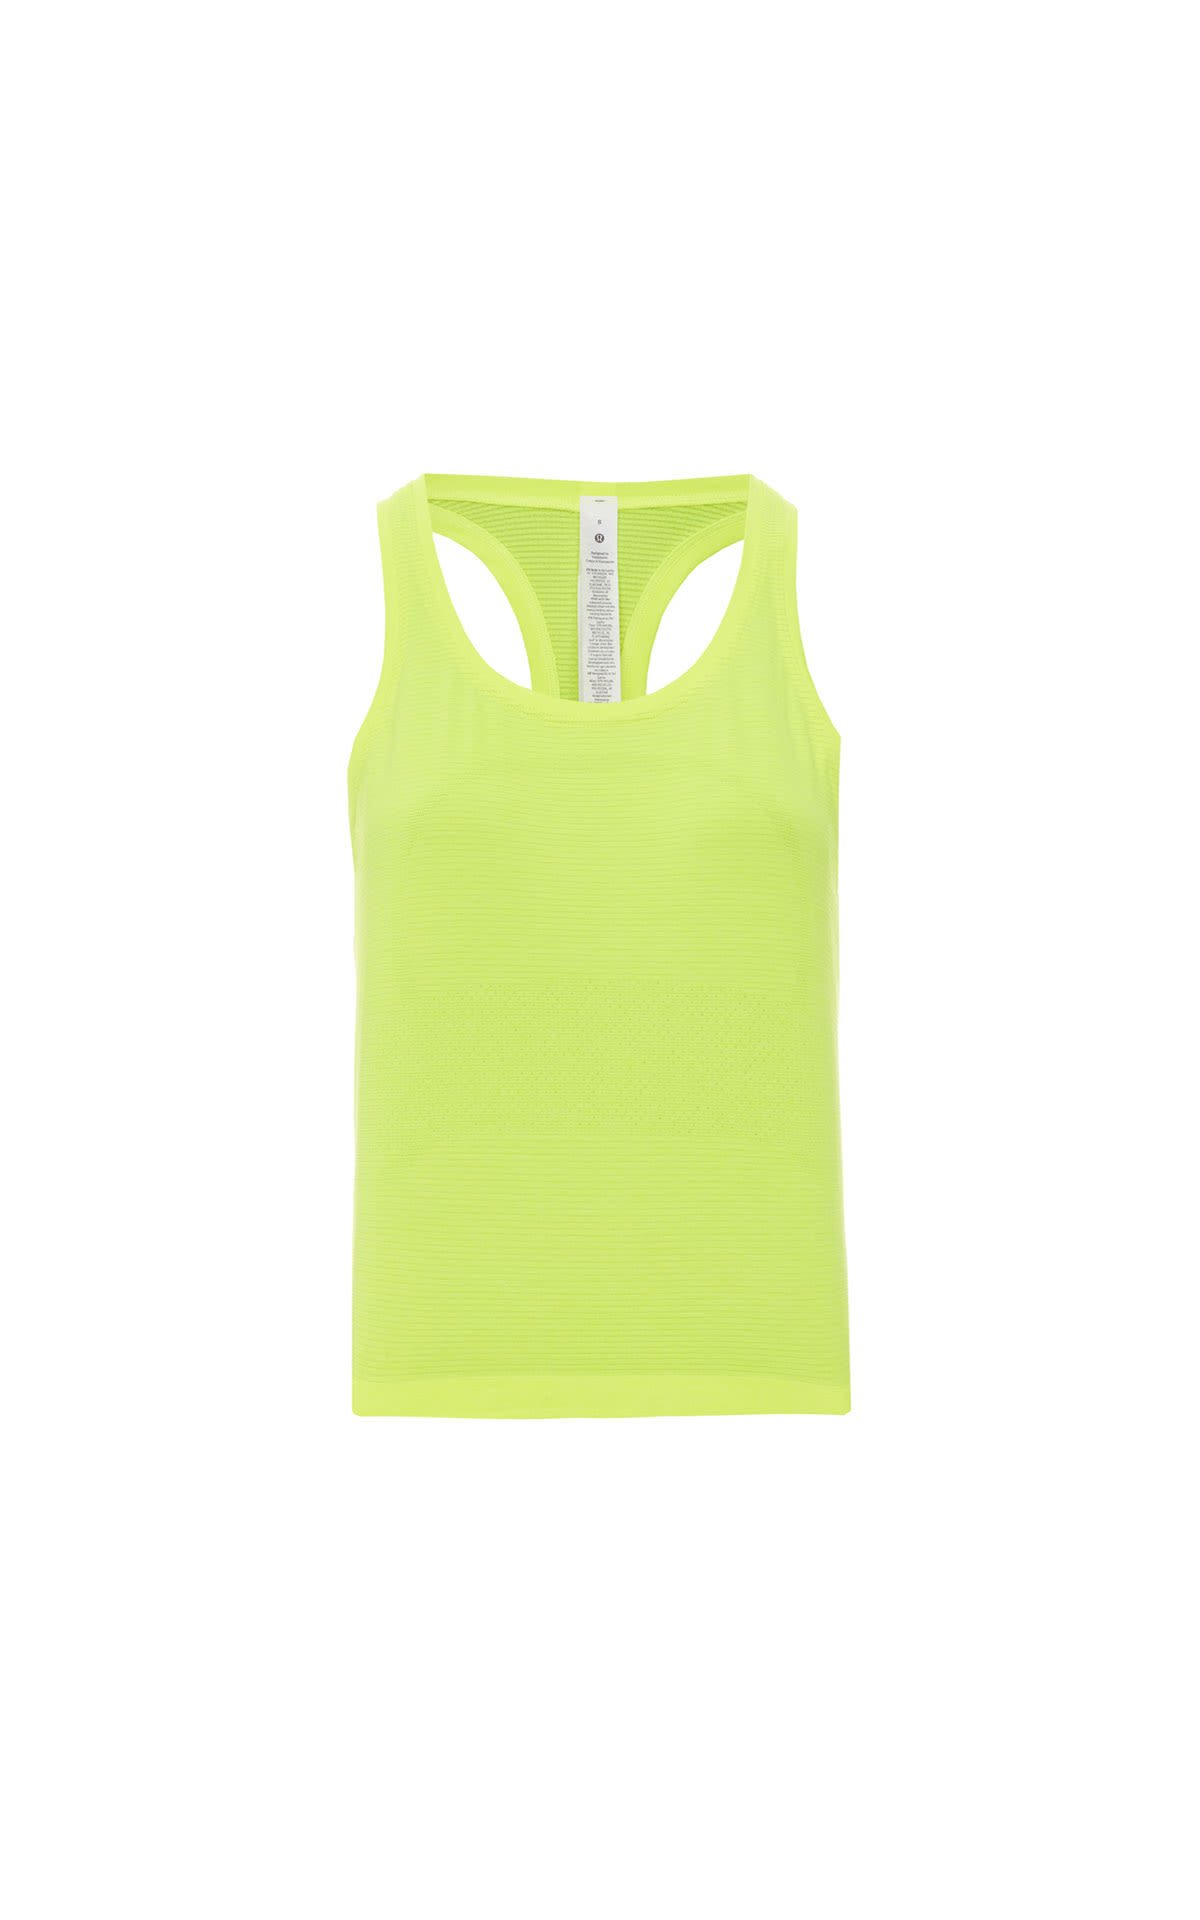 Lululemon Swiftly tech RB tank from Bicester Village